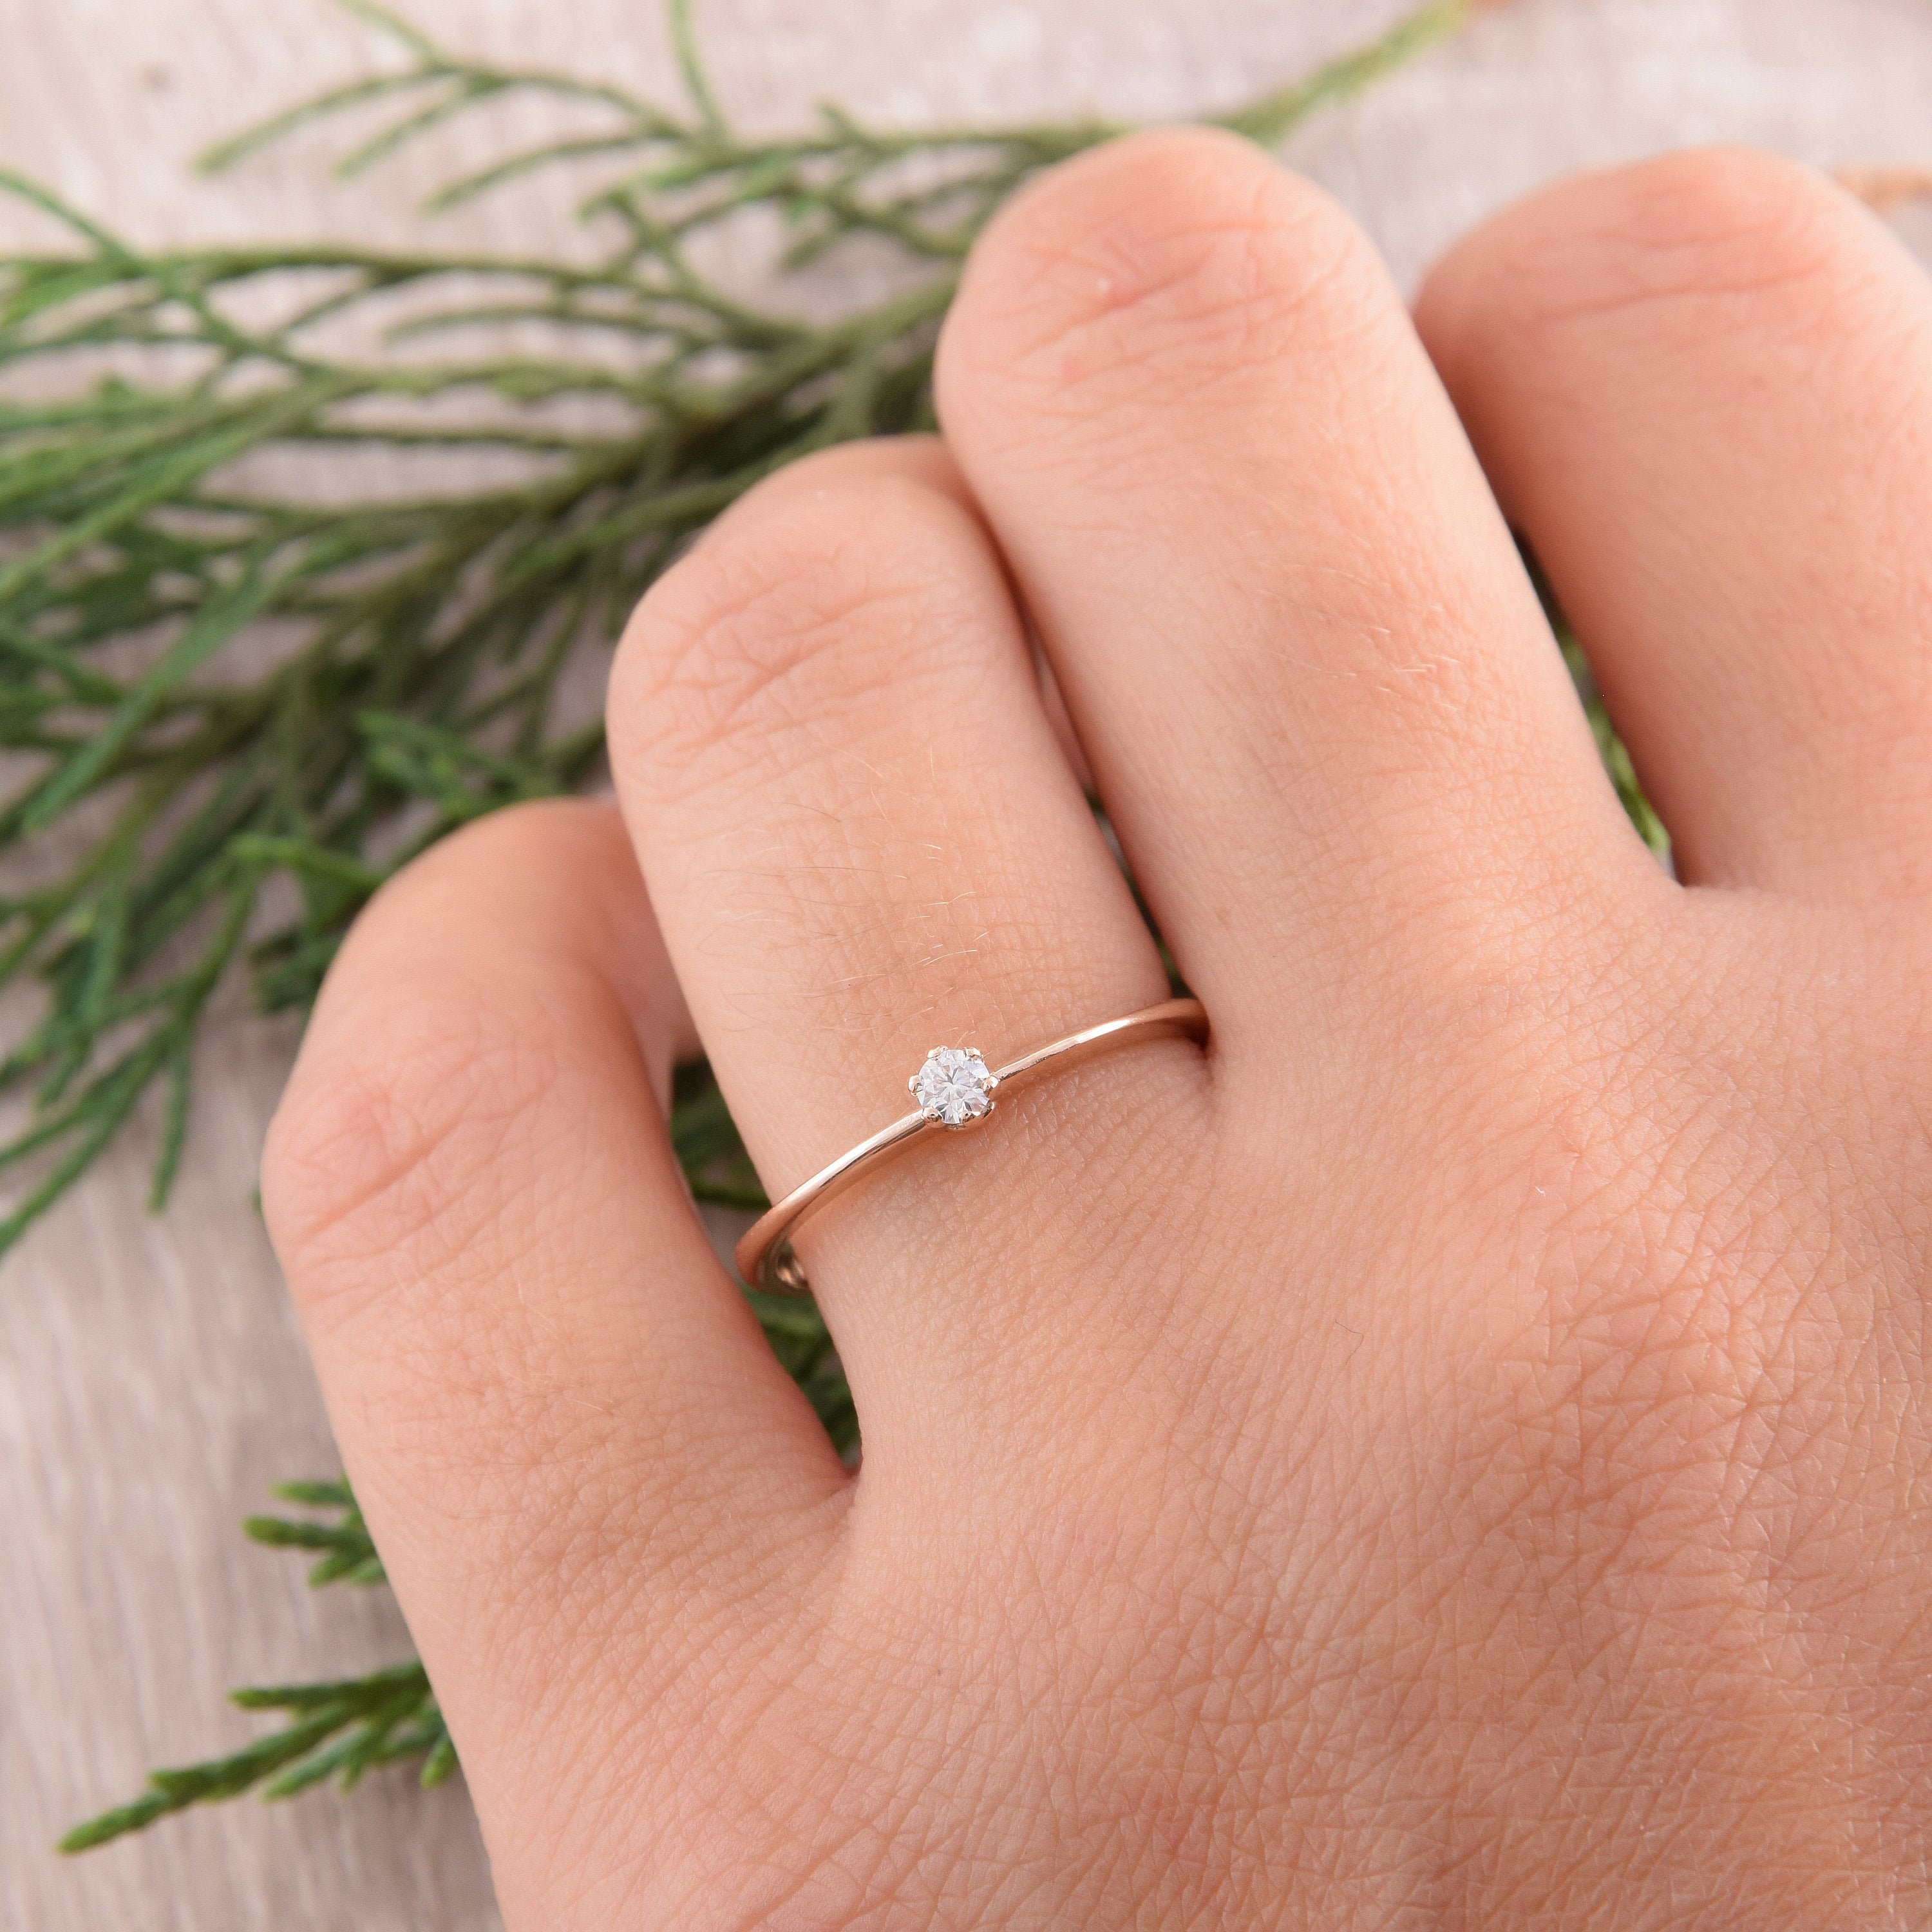 Gold Diamond Wave Ring by Caitlyn Minimalist Dainty Crown Ring Minimalist  Promise Ring Wedding Jewelry Anniversary Gift RR093 - Etsy